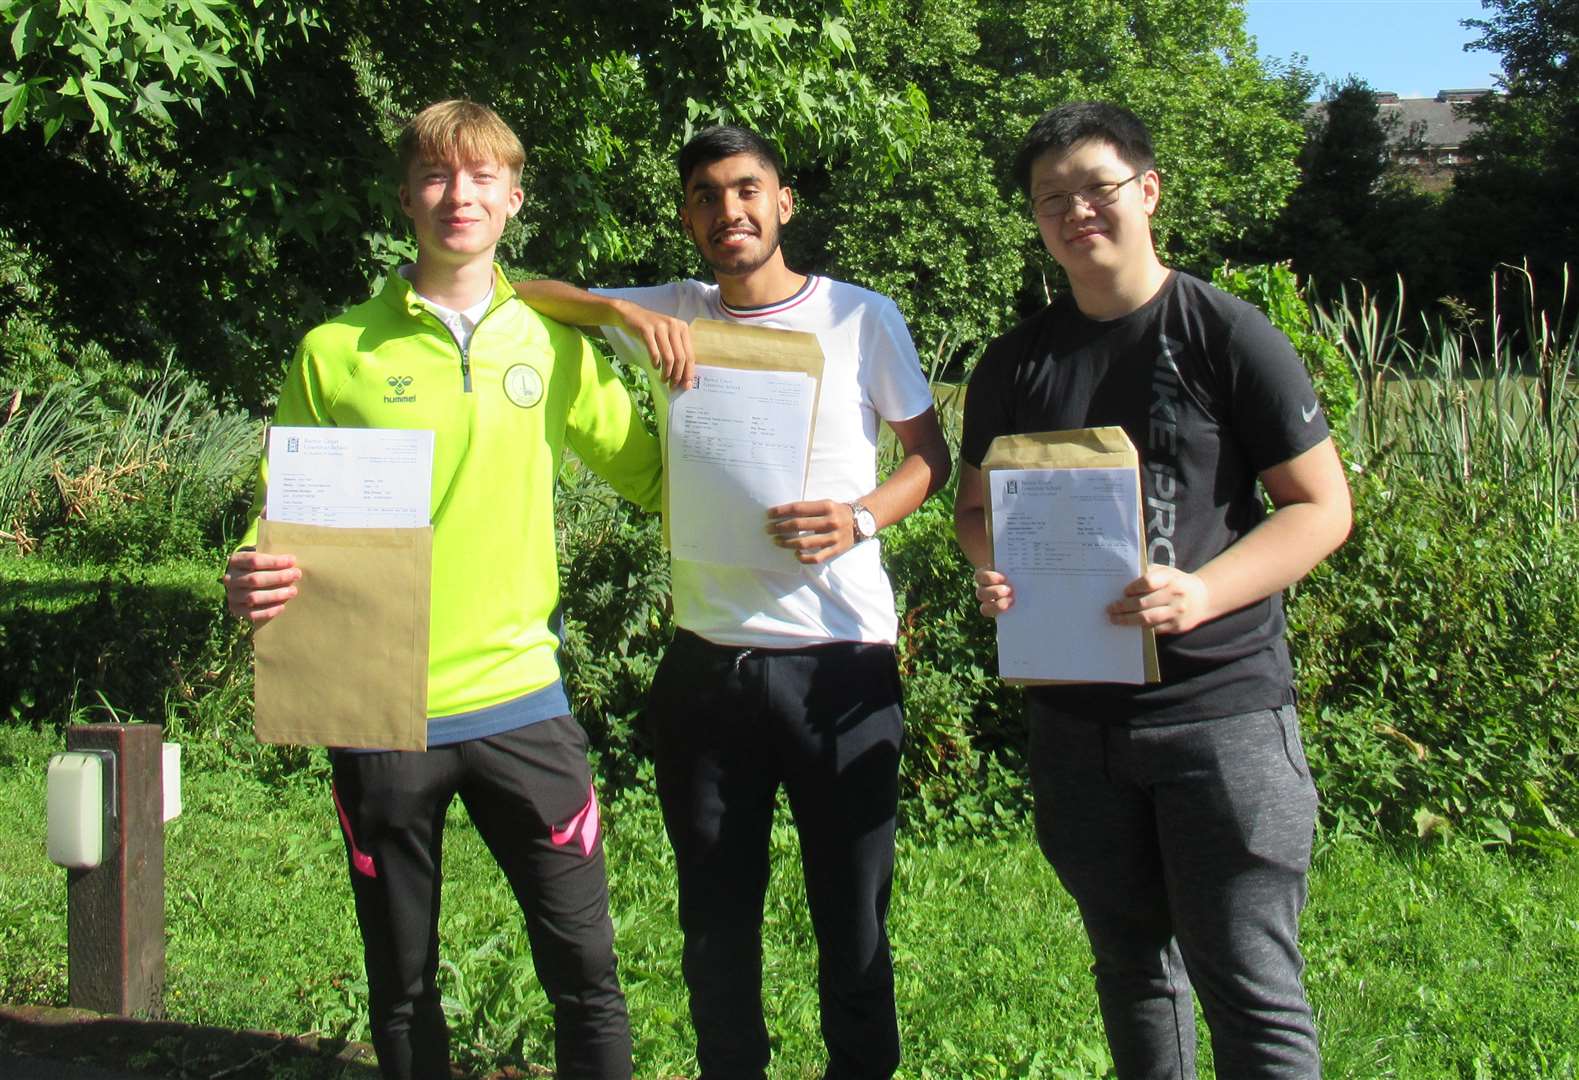 Pupils at Barton Court Grammar School in Canterbury collect their A-level results